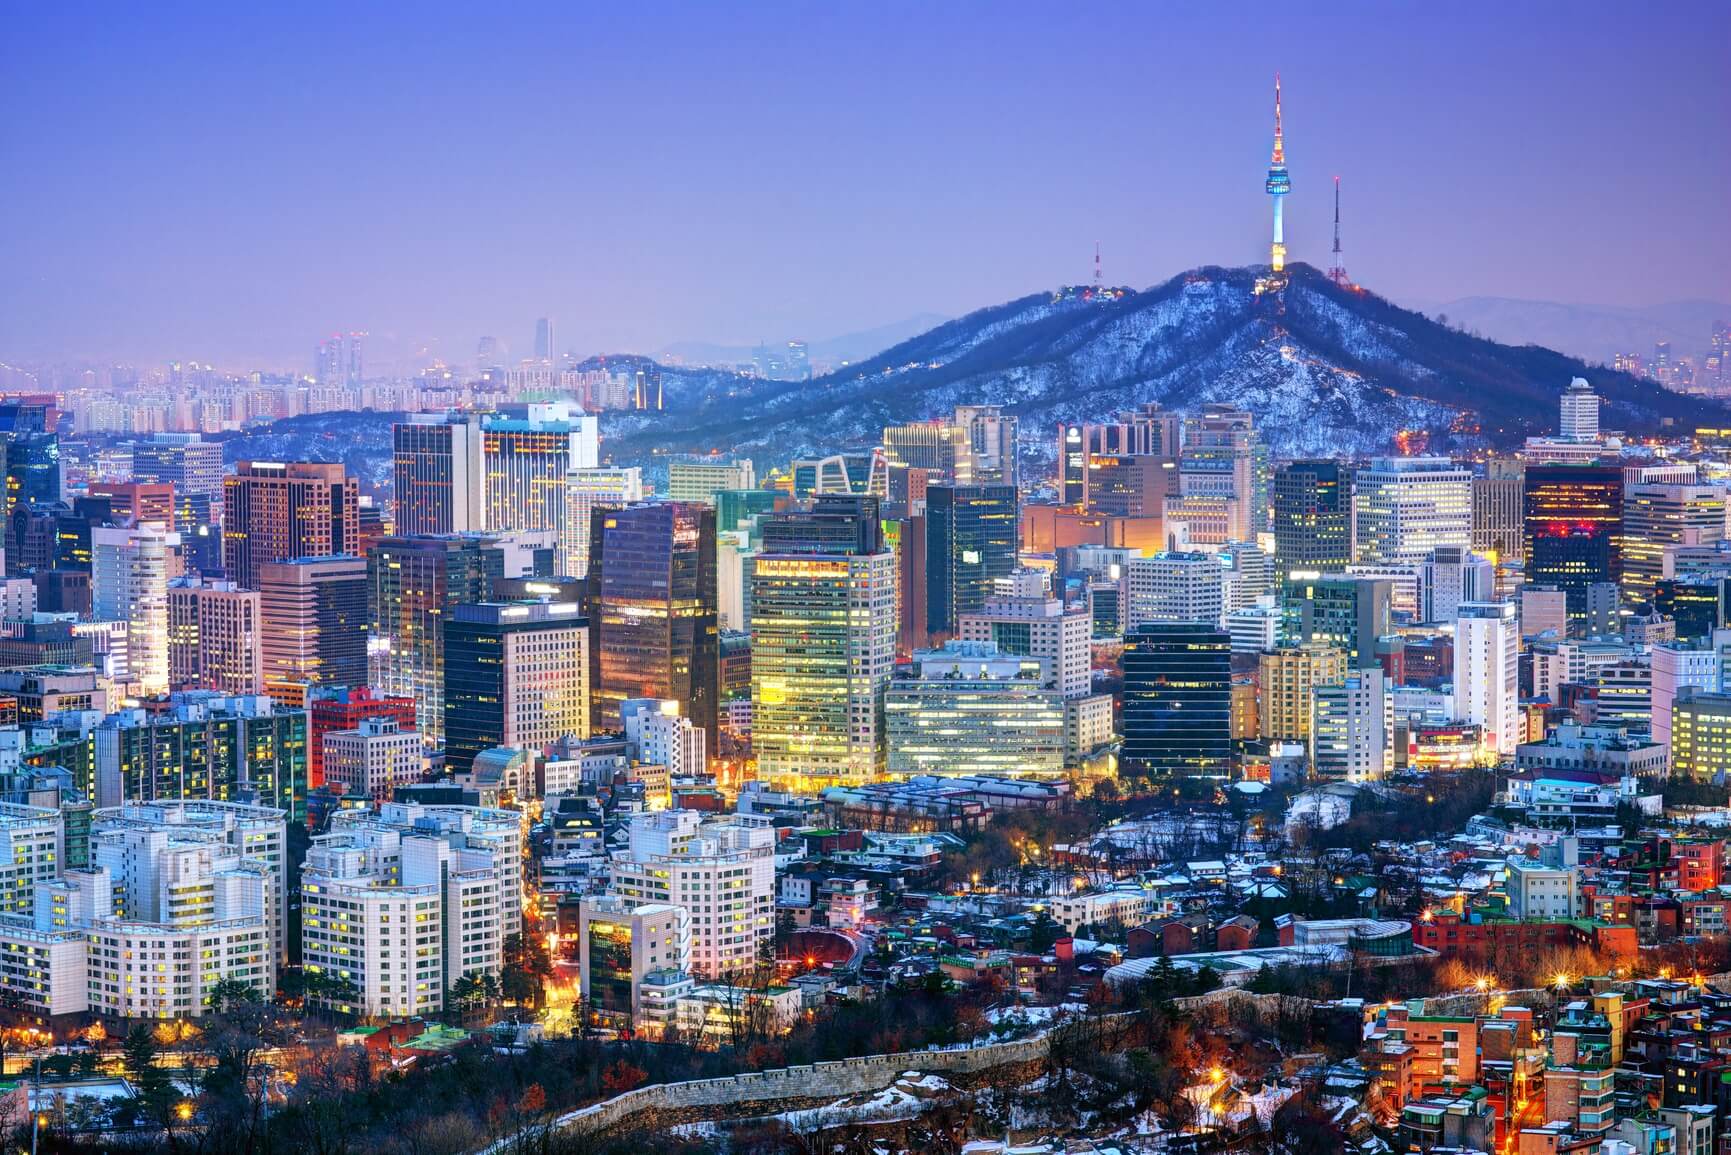 Flight deals from Warsaw, Poland to Seoul, South Korea | Secret Flying